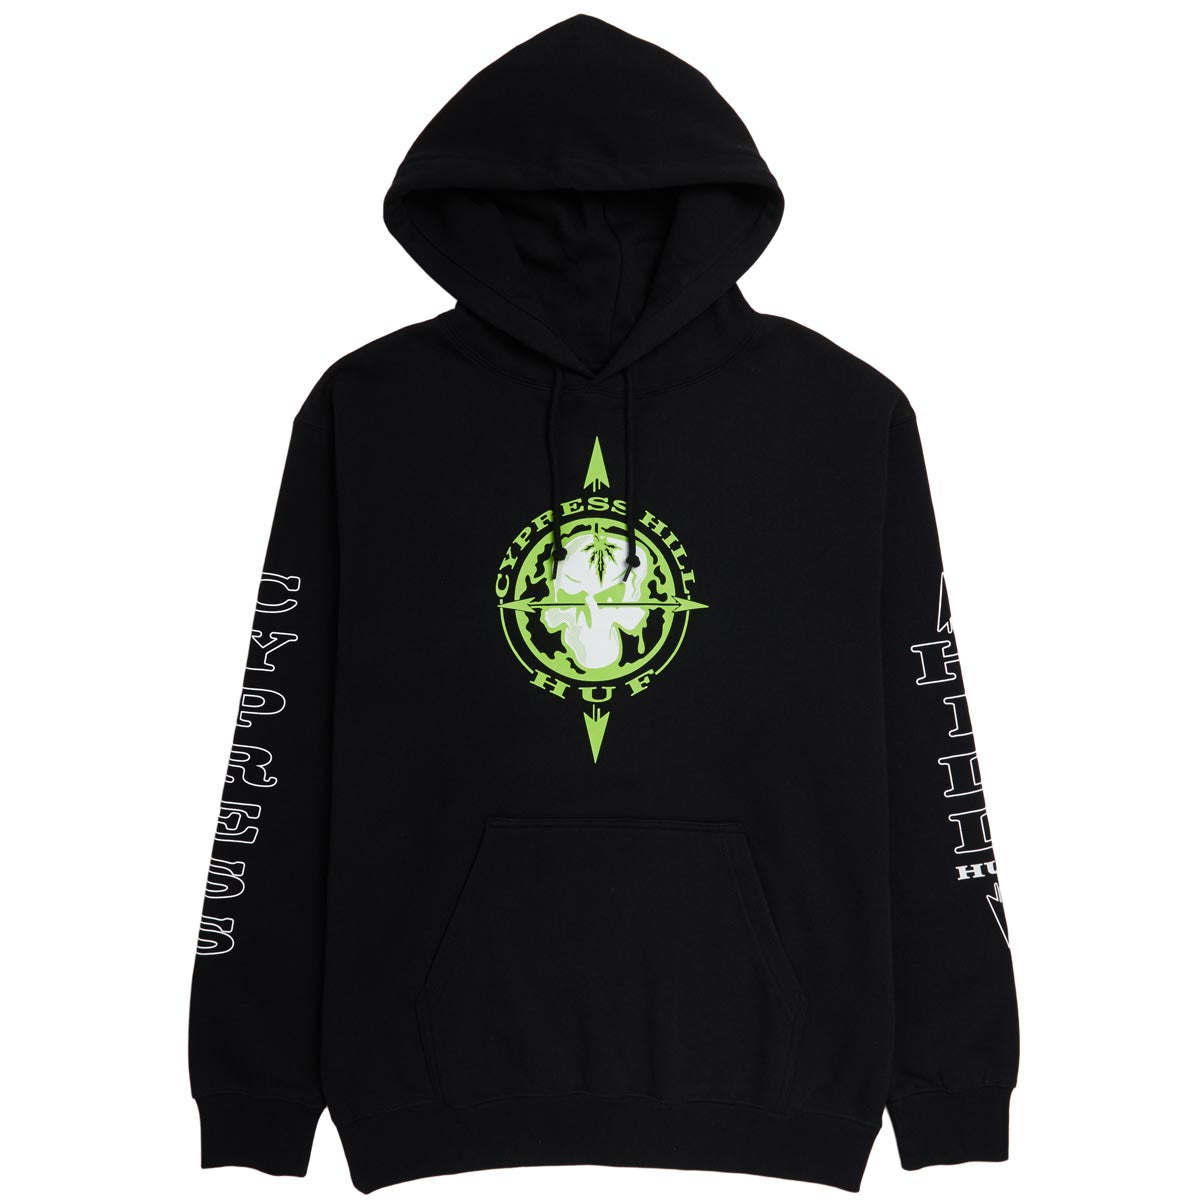 Huf x Cypress Hill Blunted Compass Hoodie - Black image 1